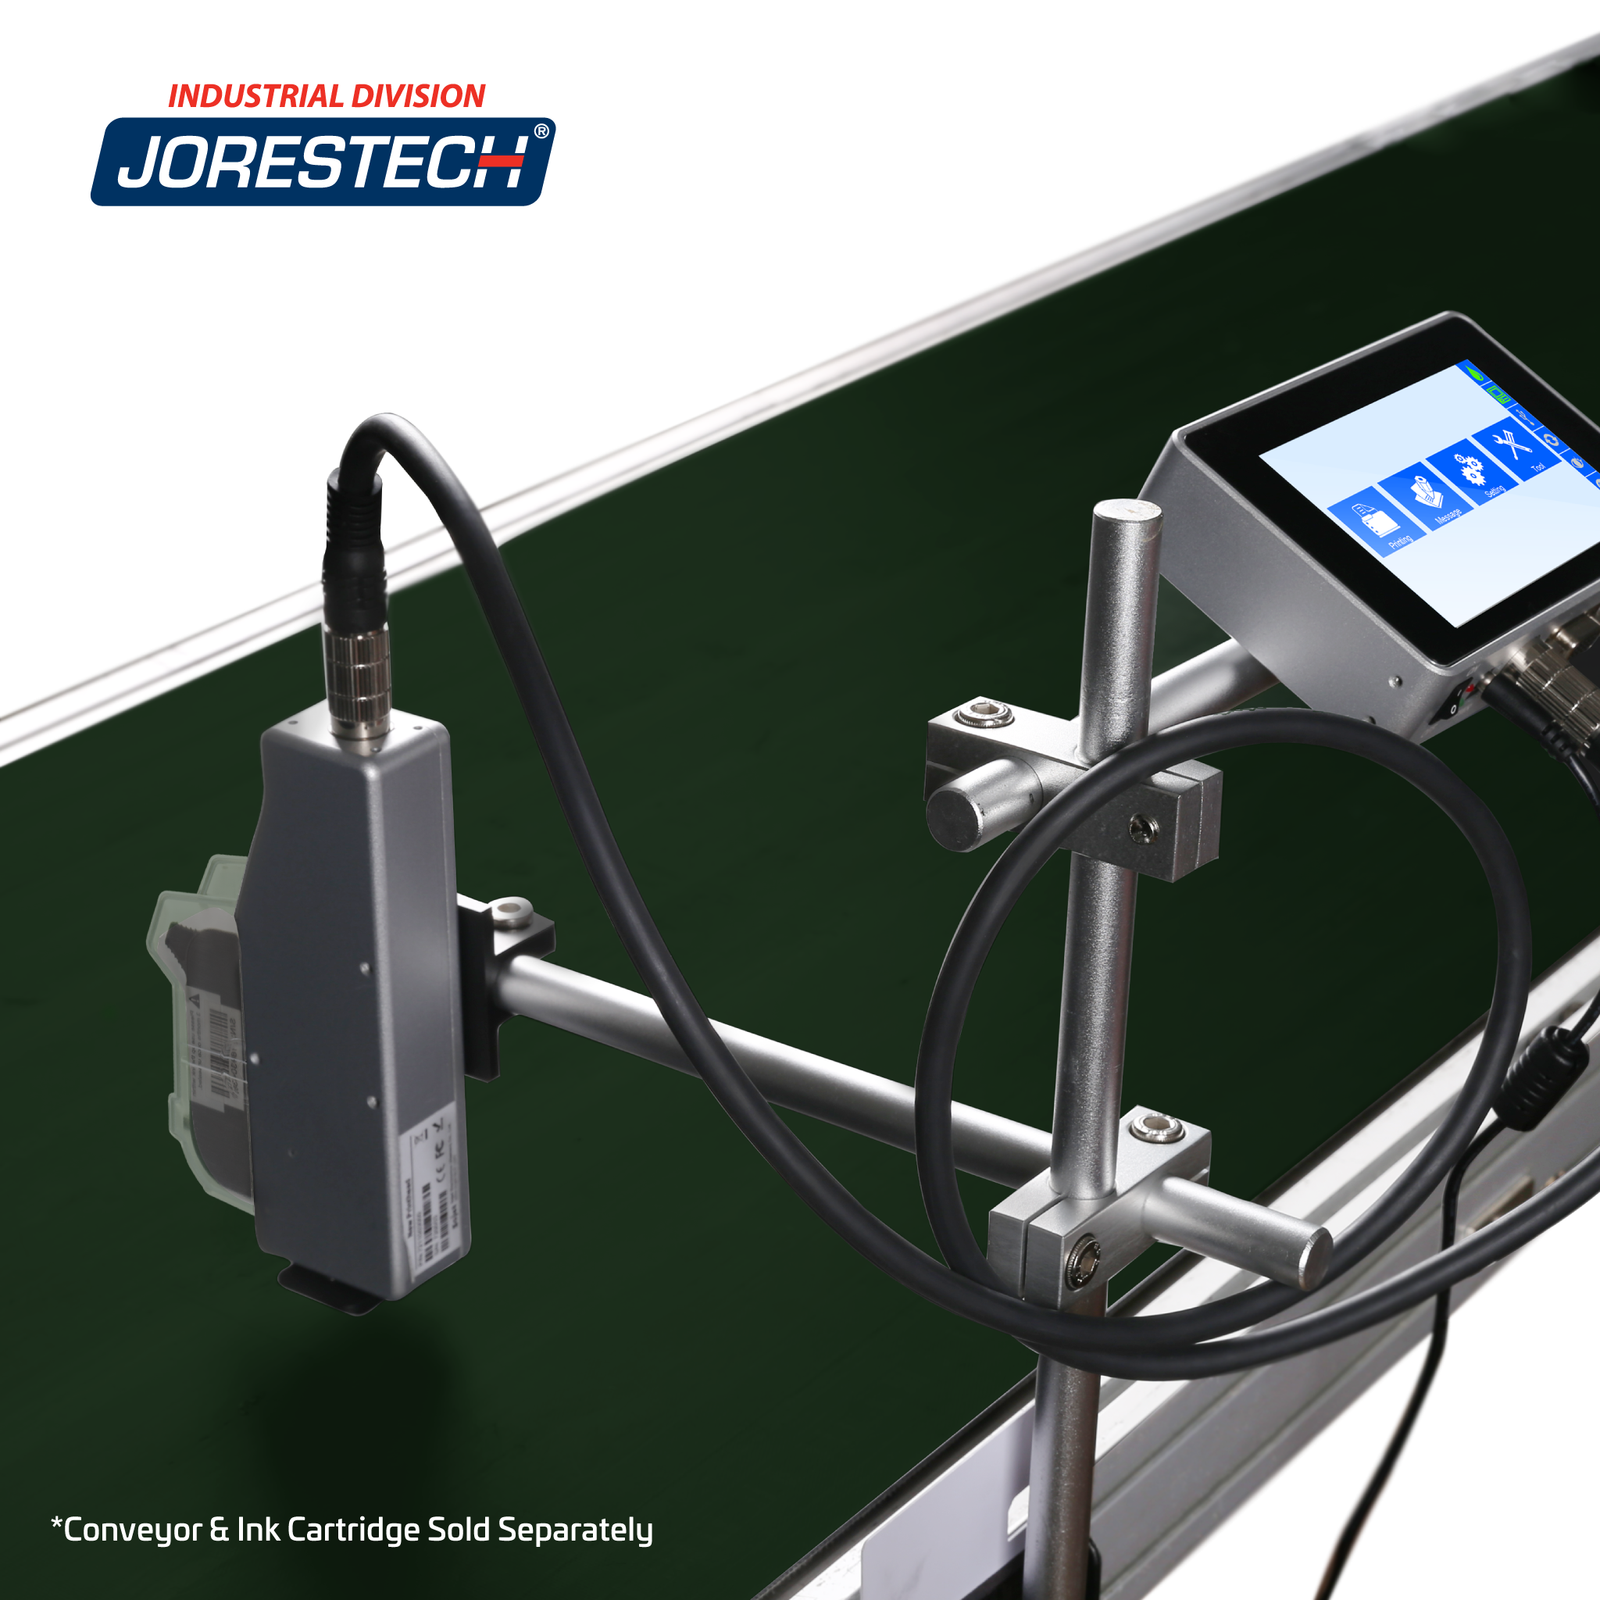 Showing the JORESTECH TIJ Inkjet Coder with stand attached to a motorized conveyor. Small text reads: Conveyor and ink cartridge sold separately. Digital touchscreen on the coder is turned on.